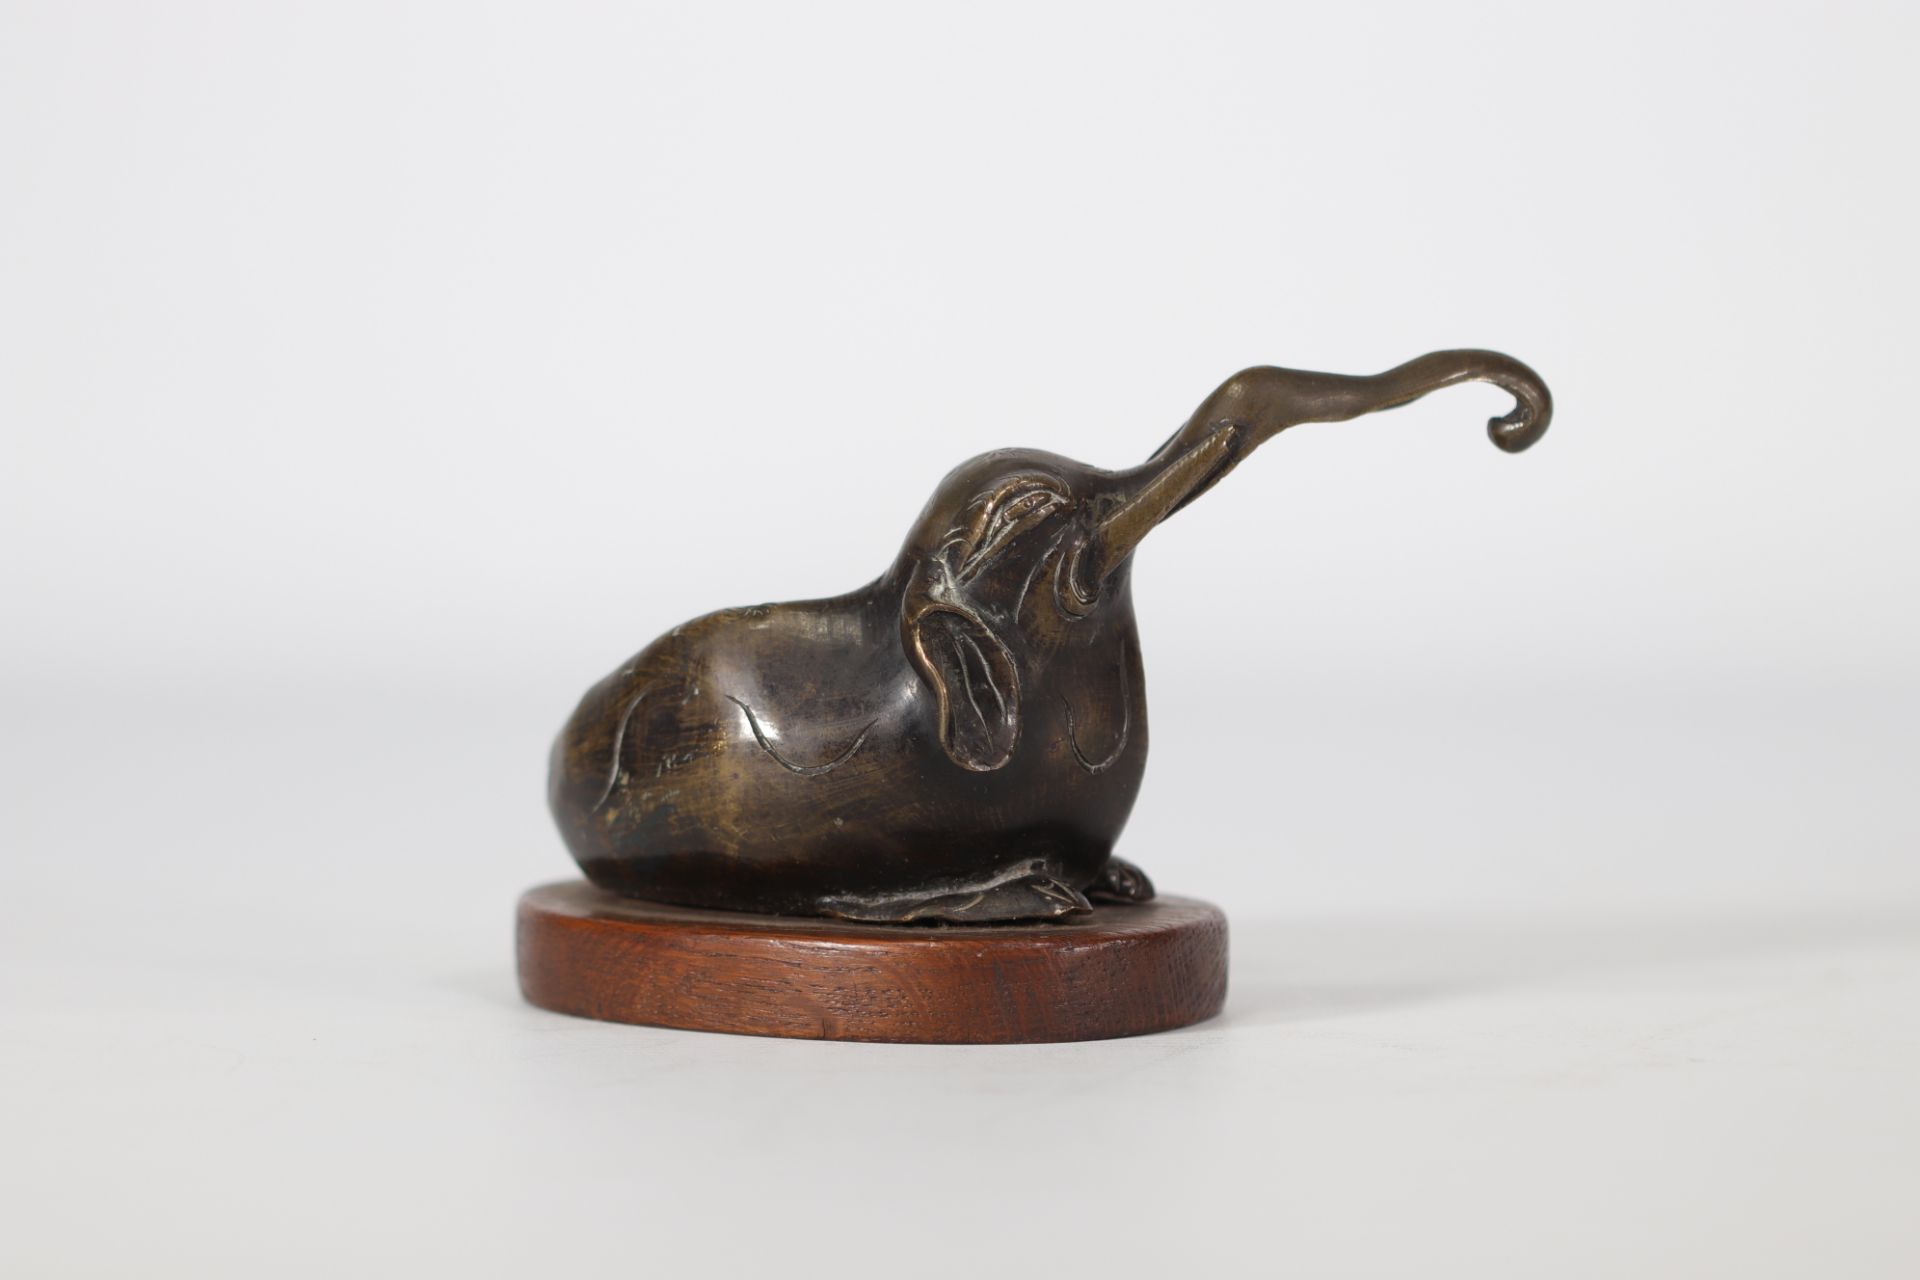 Highly detailed bronze elephant from the Qing period (æ¸…æœ) - Image 2 of 3